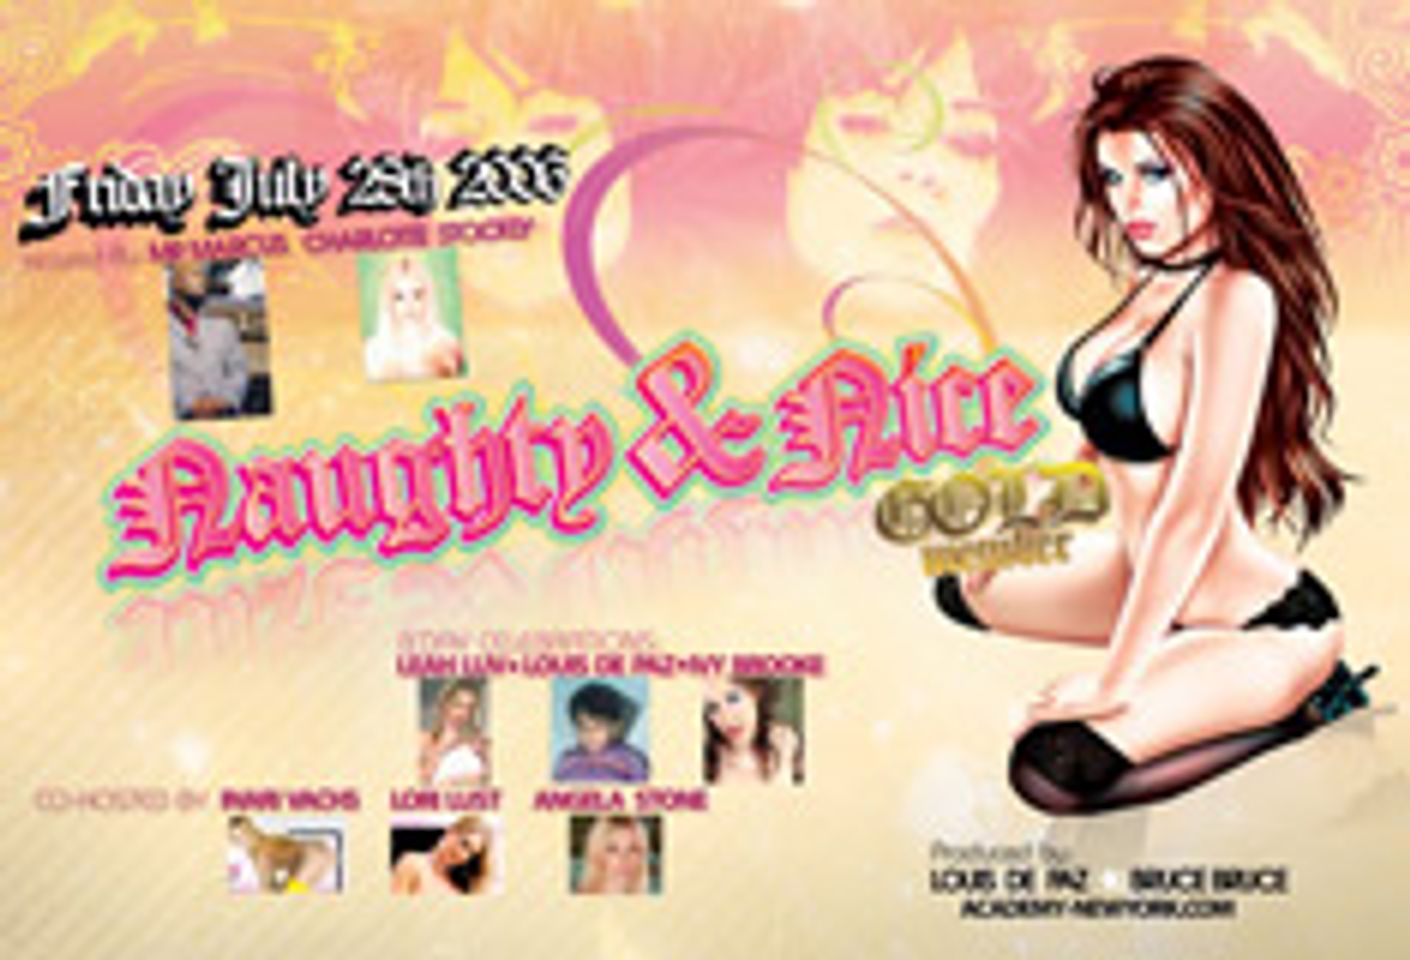 Naughty and Nice Party Set for July 28